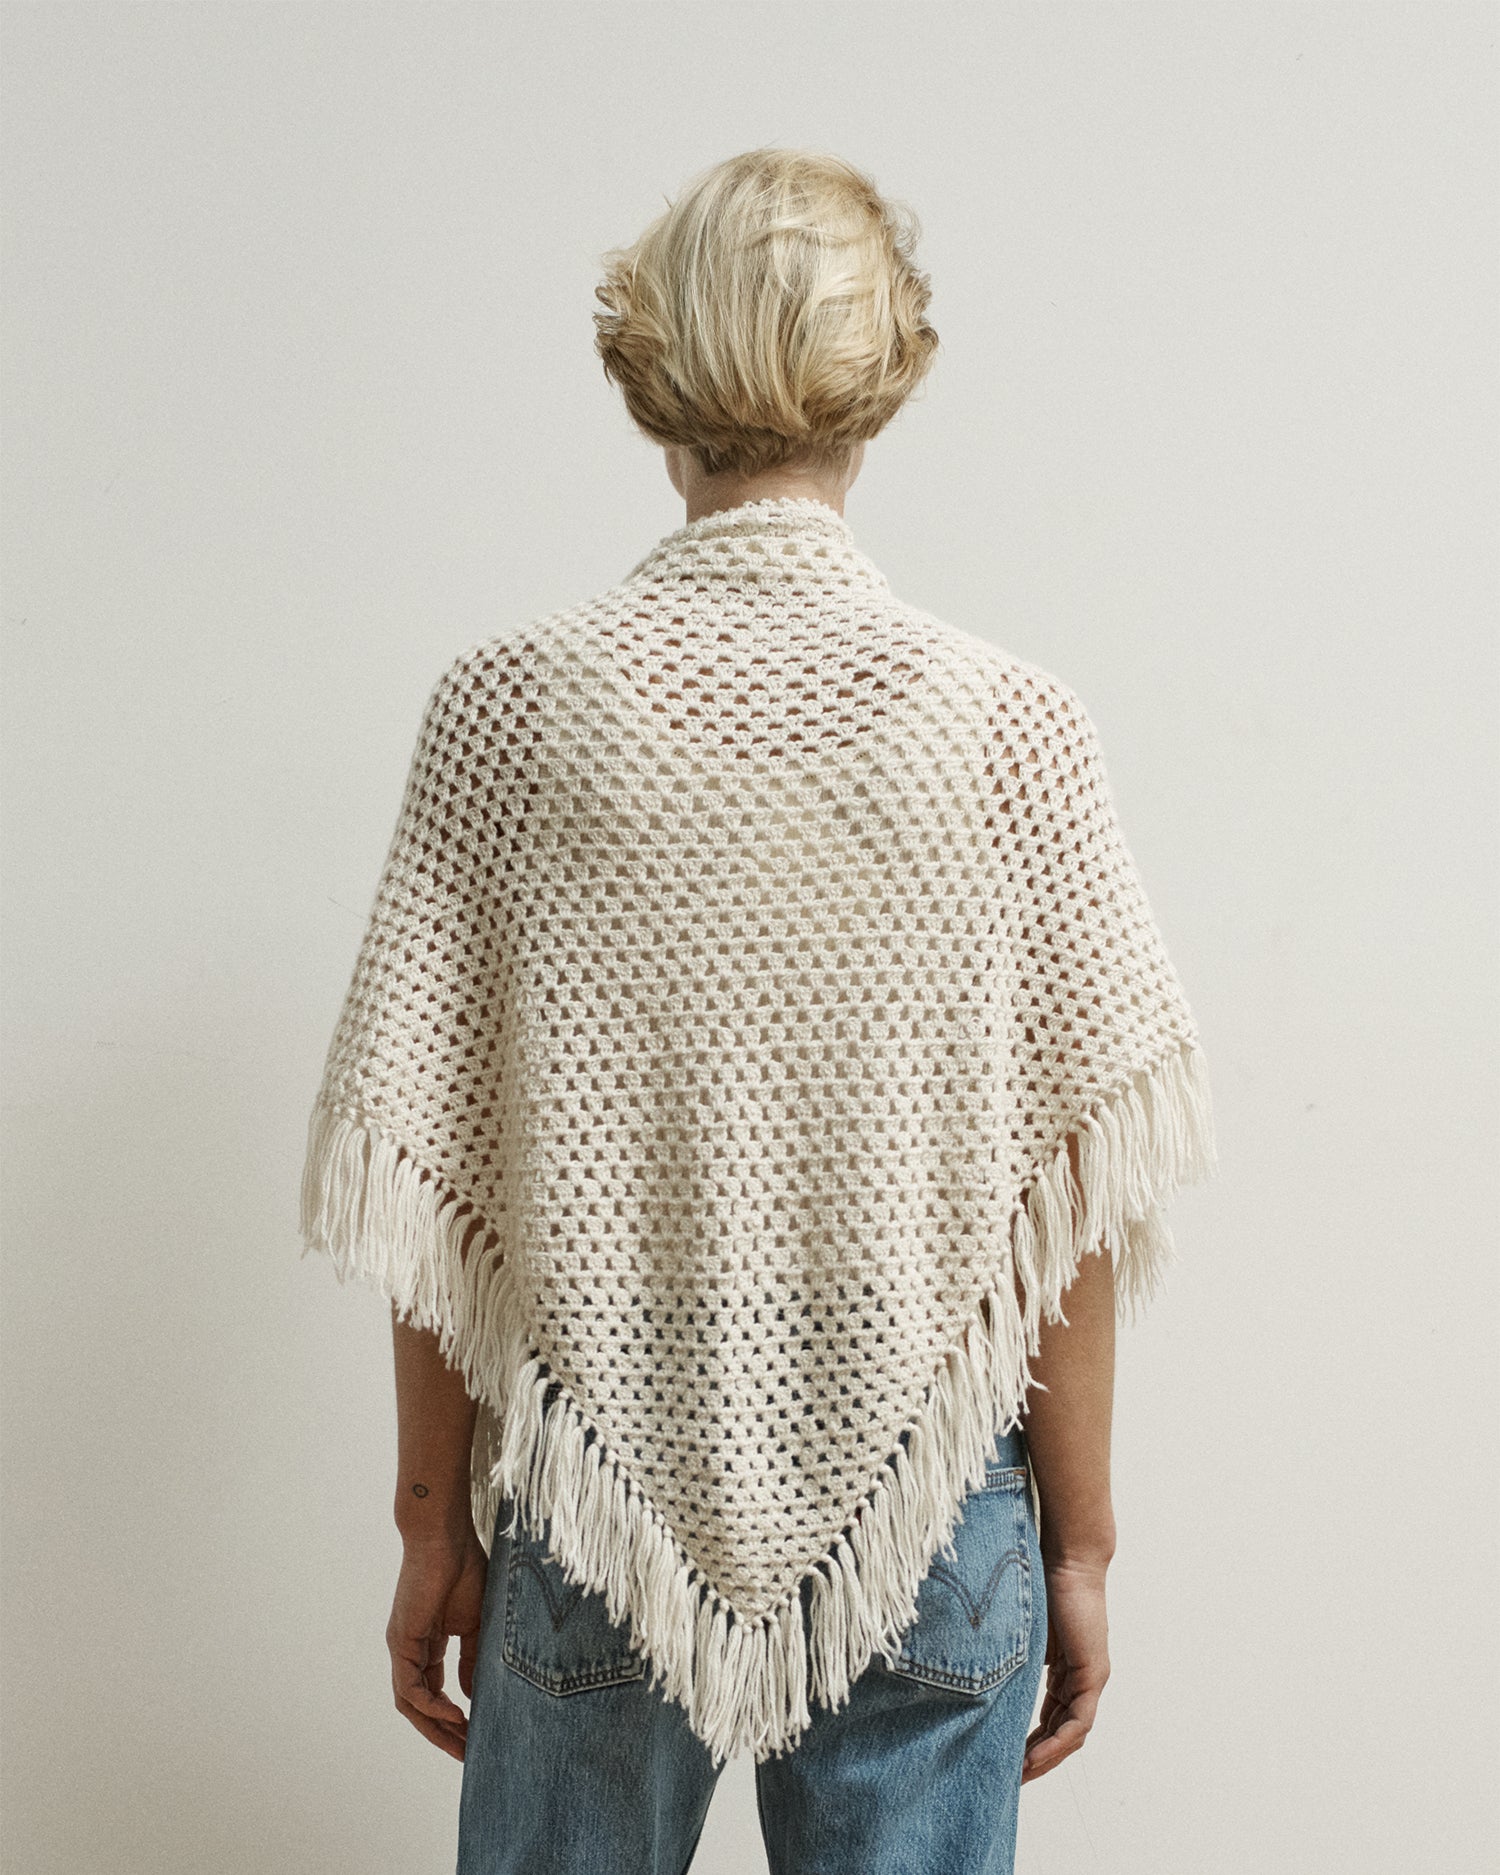 Woman facing away from camera wearing a cream-colored shawl that drapes over her back. Shawl is crocheted and has fringe.